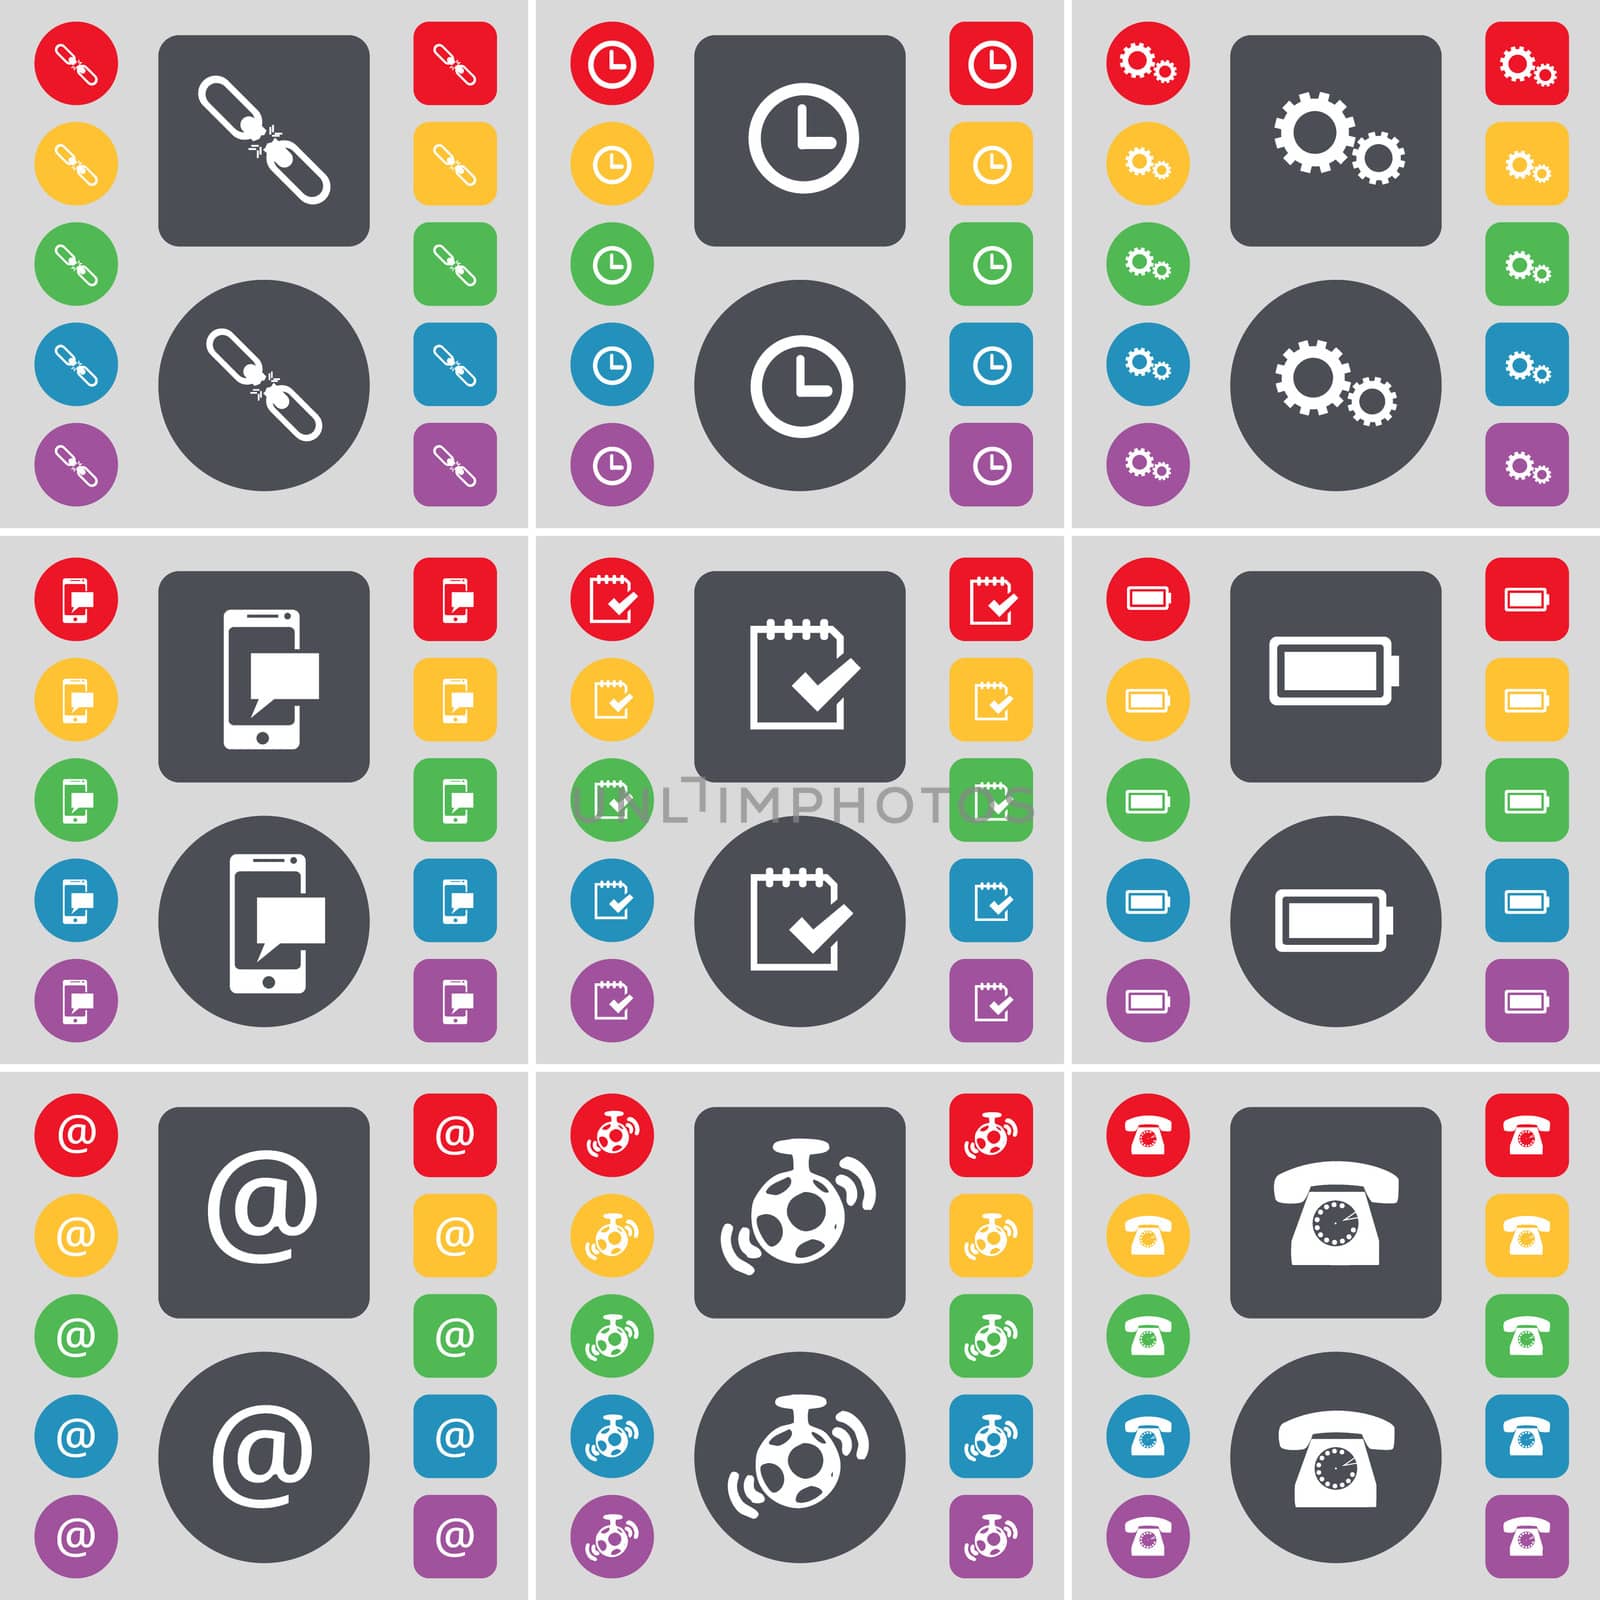 Link, Clock, Gear, SMS, Survey, Battery, Mail, Speaker, Retro phone icon symbol. A large set of flat, colored buttons for your design.  by serhii_lohvyniuk